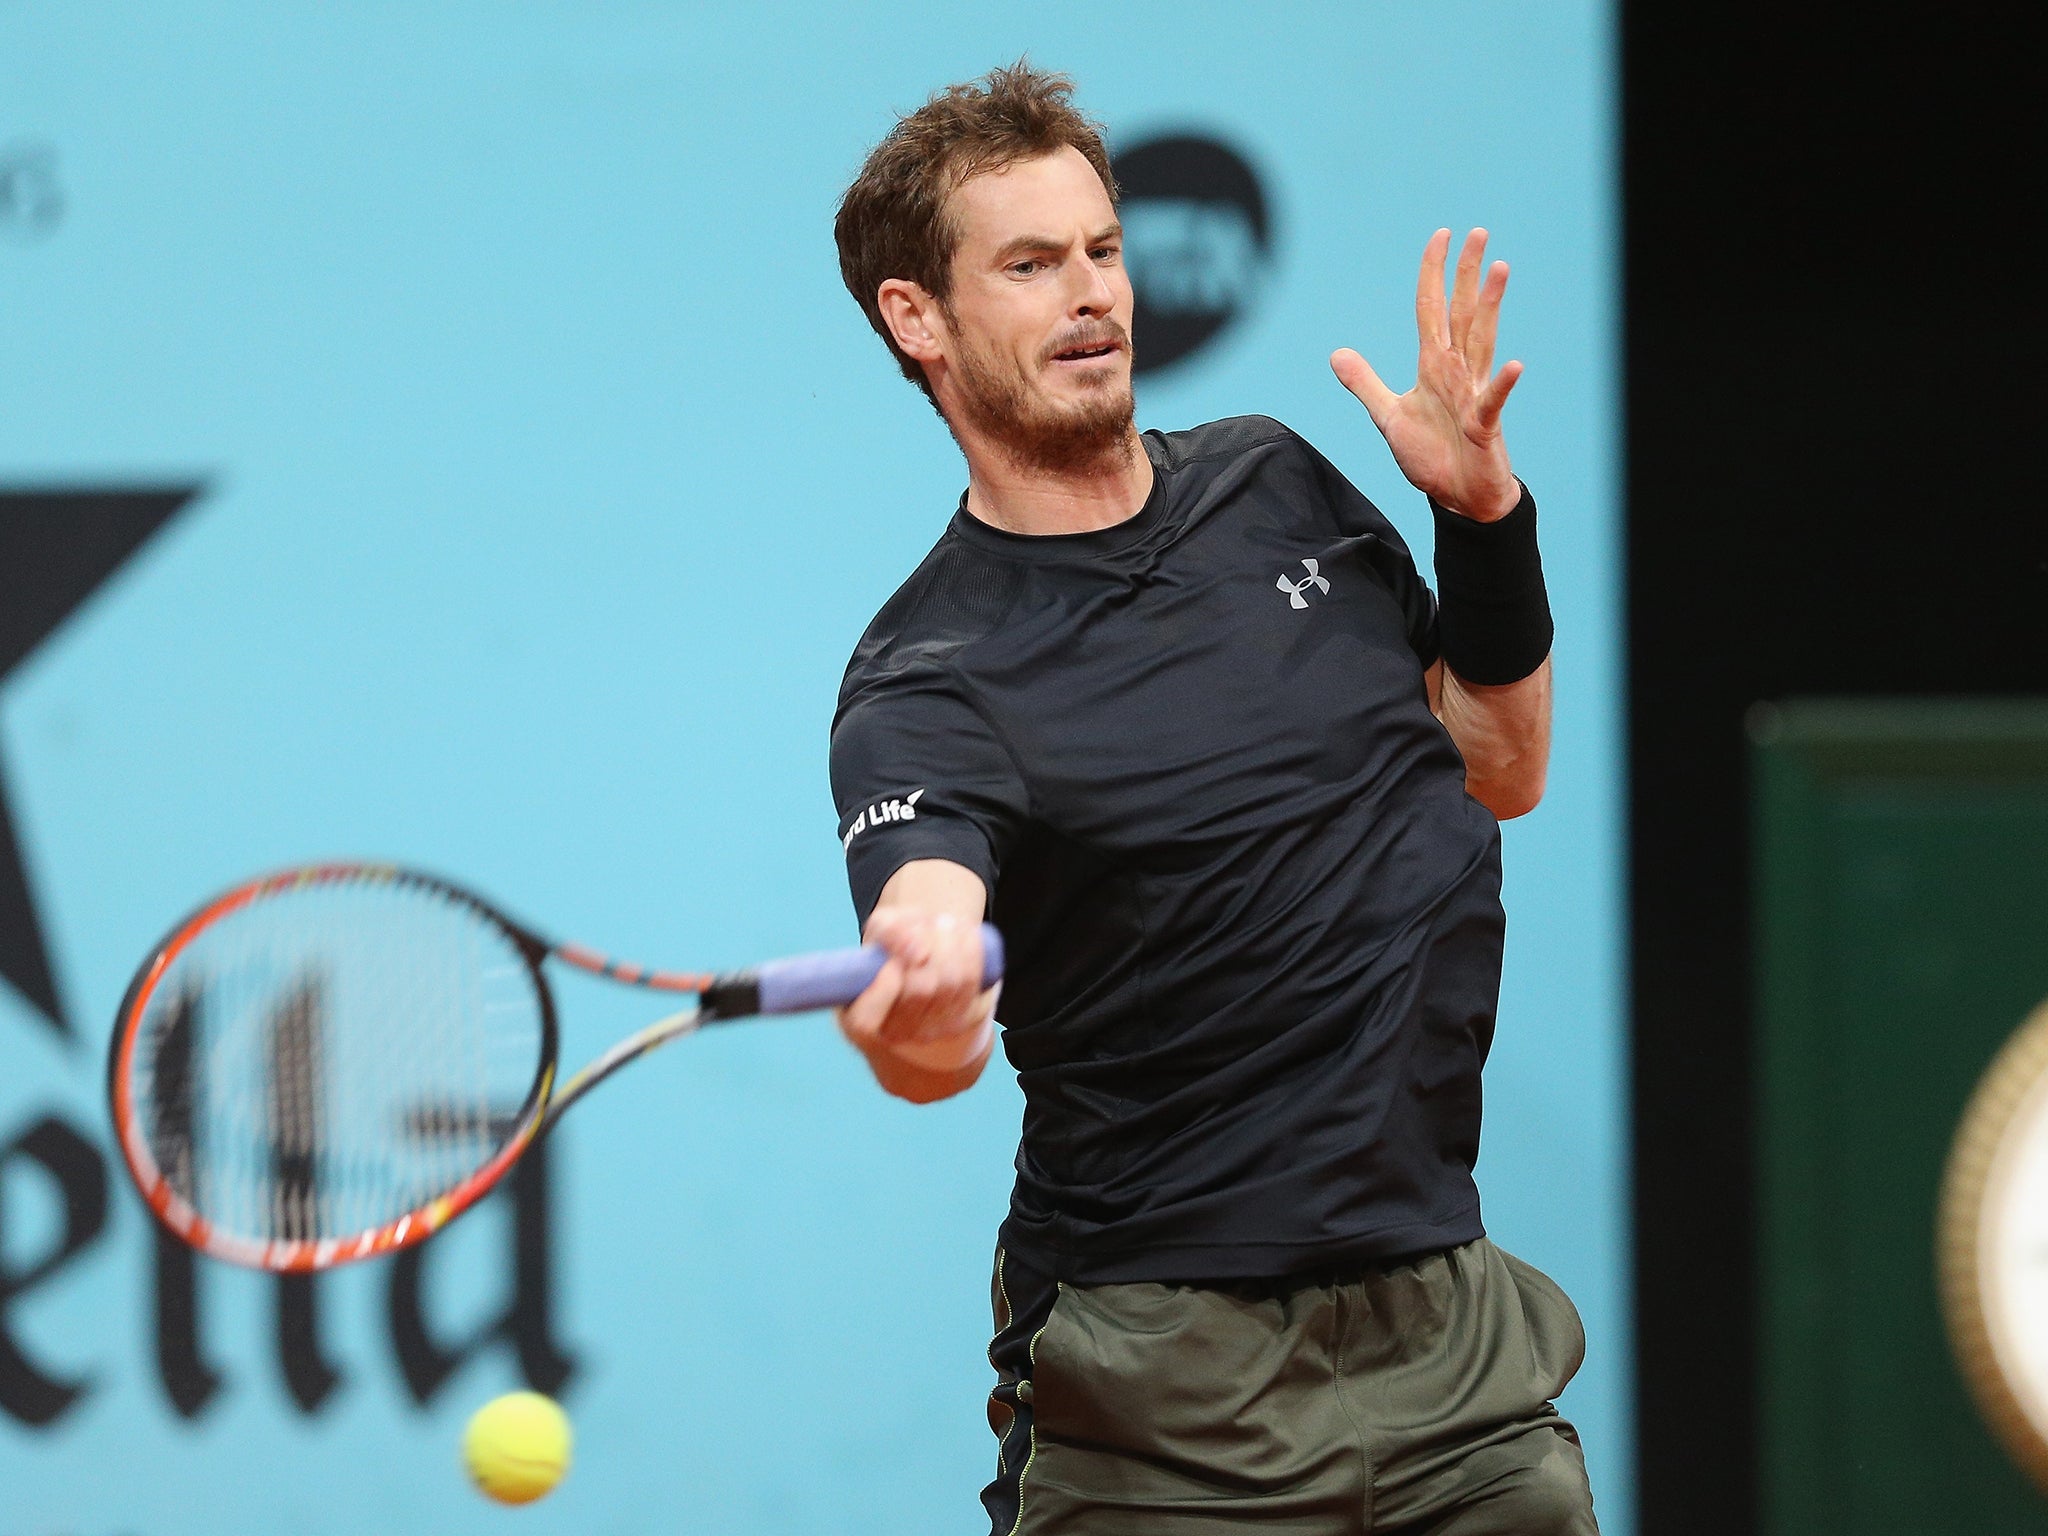 Andy Murray won his match in Madrid in just 64 minutes